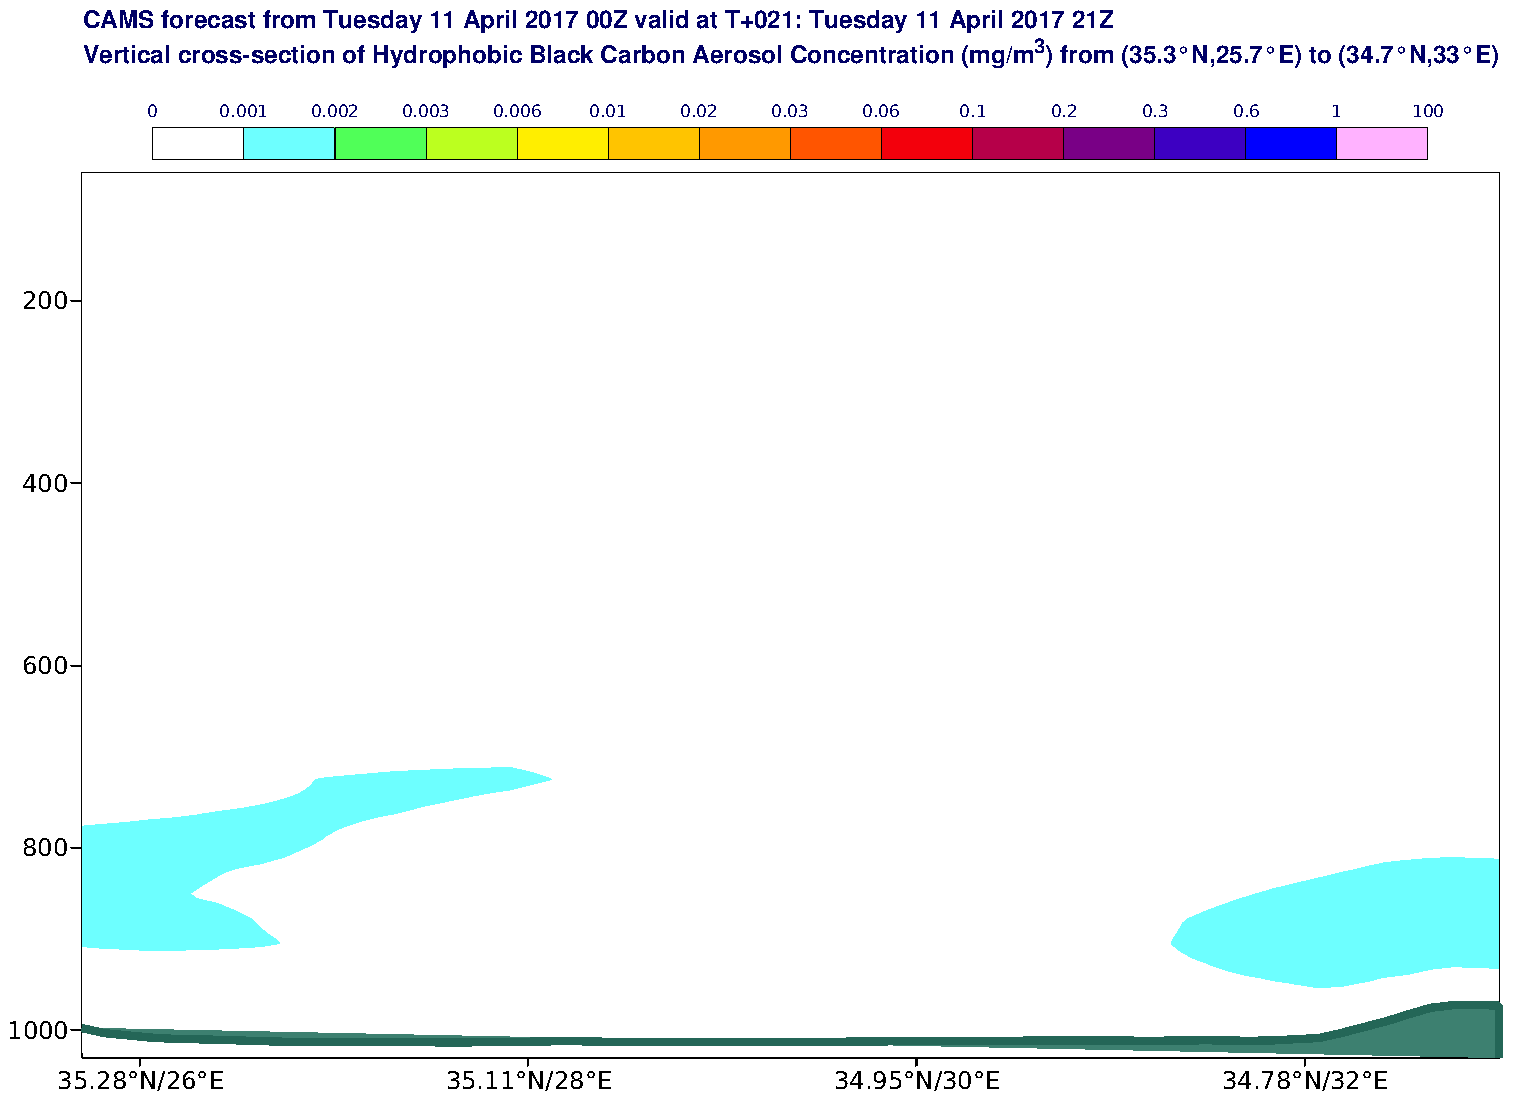 Vertical cross-section of Hydrophobic Black Carbon Aerosol Concentration (mg/m3) valid at T21 - 2017-04-11 21:00